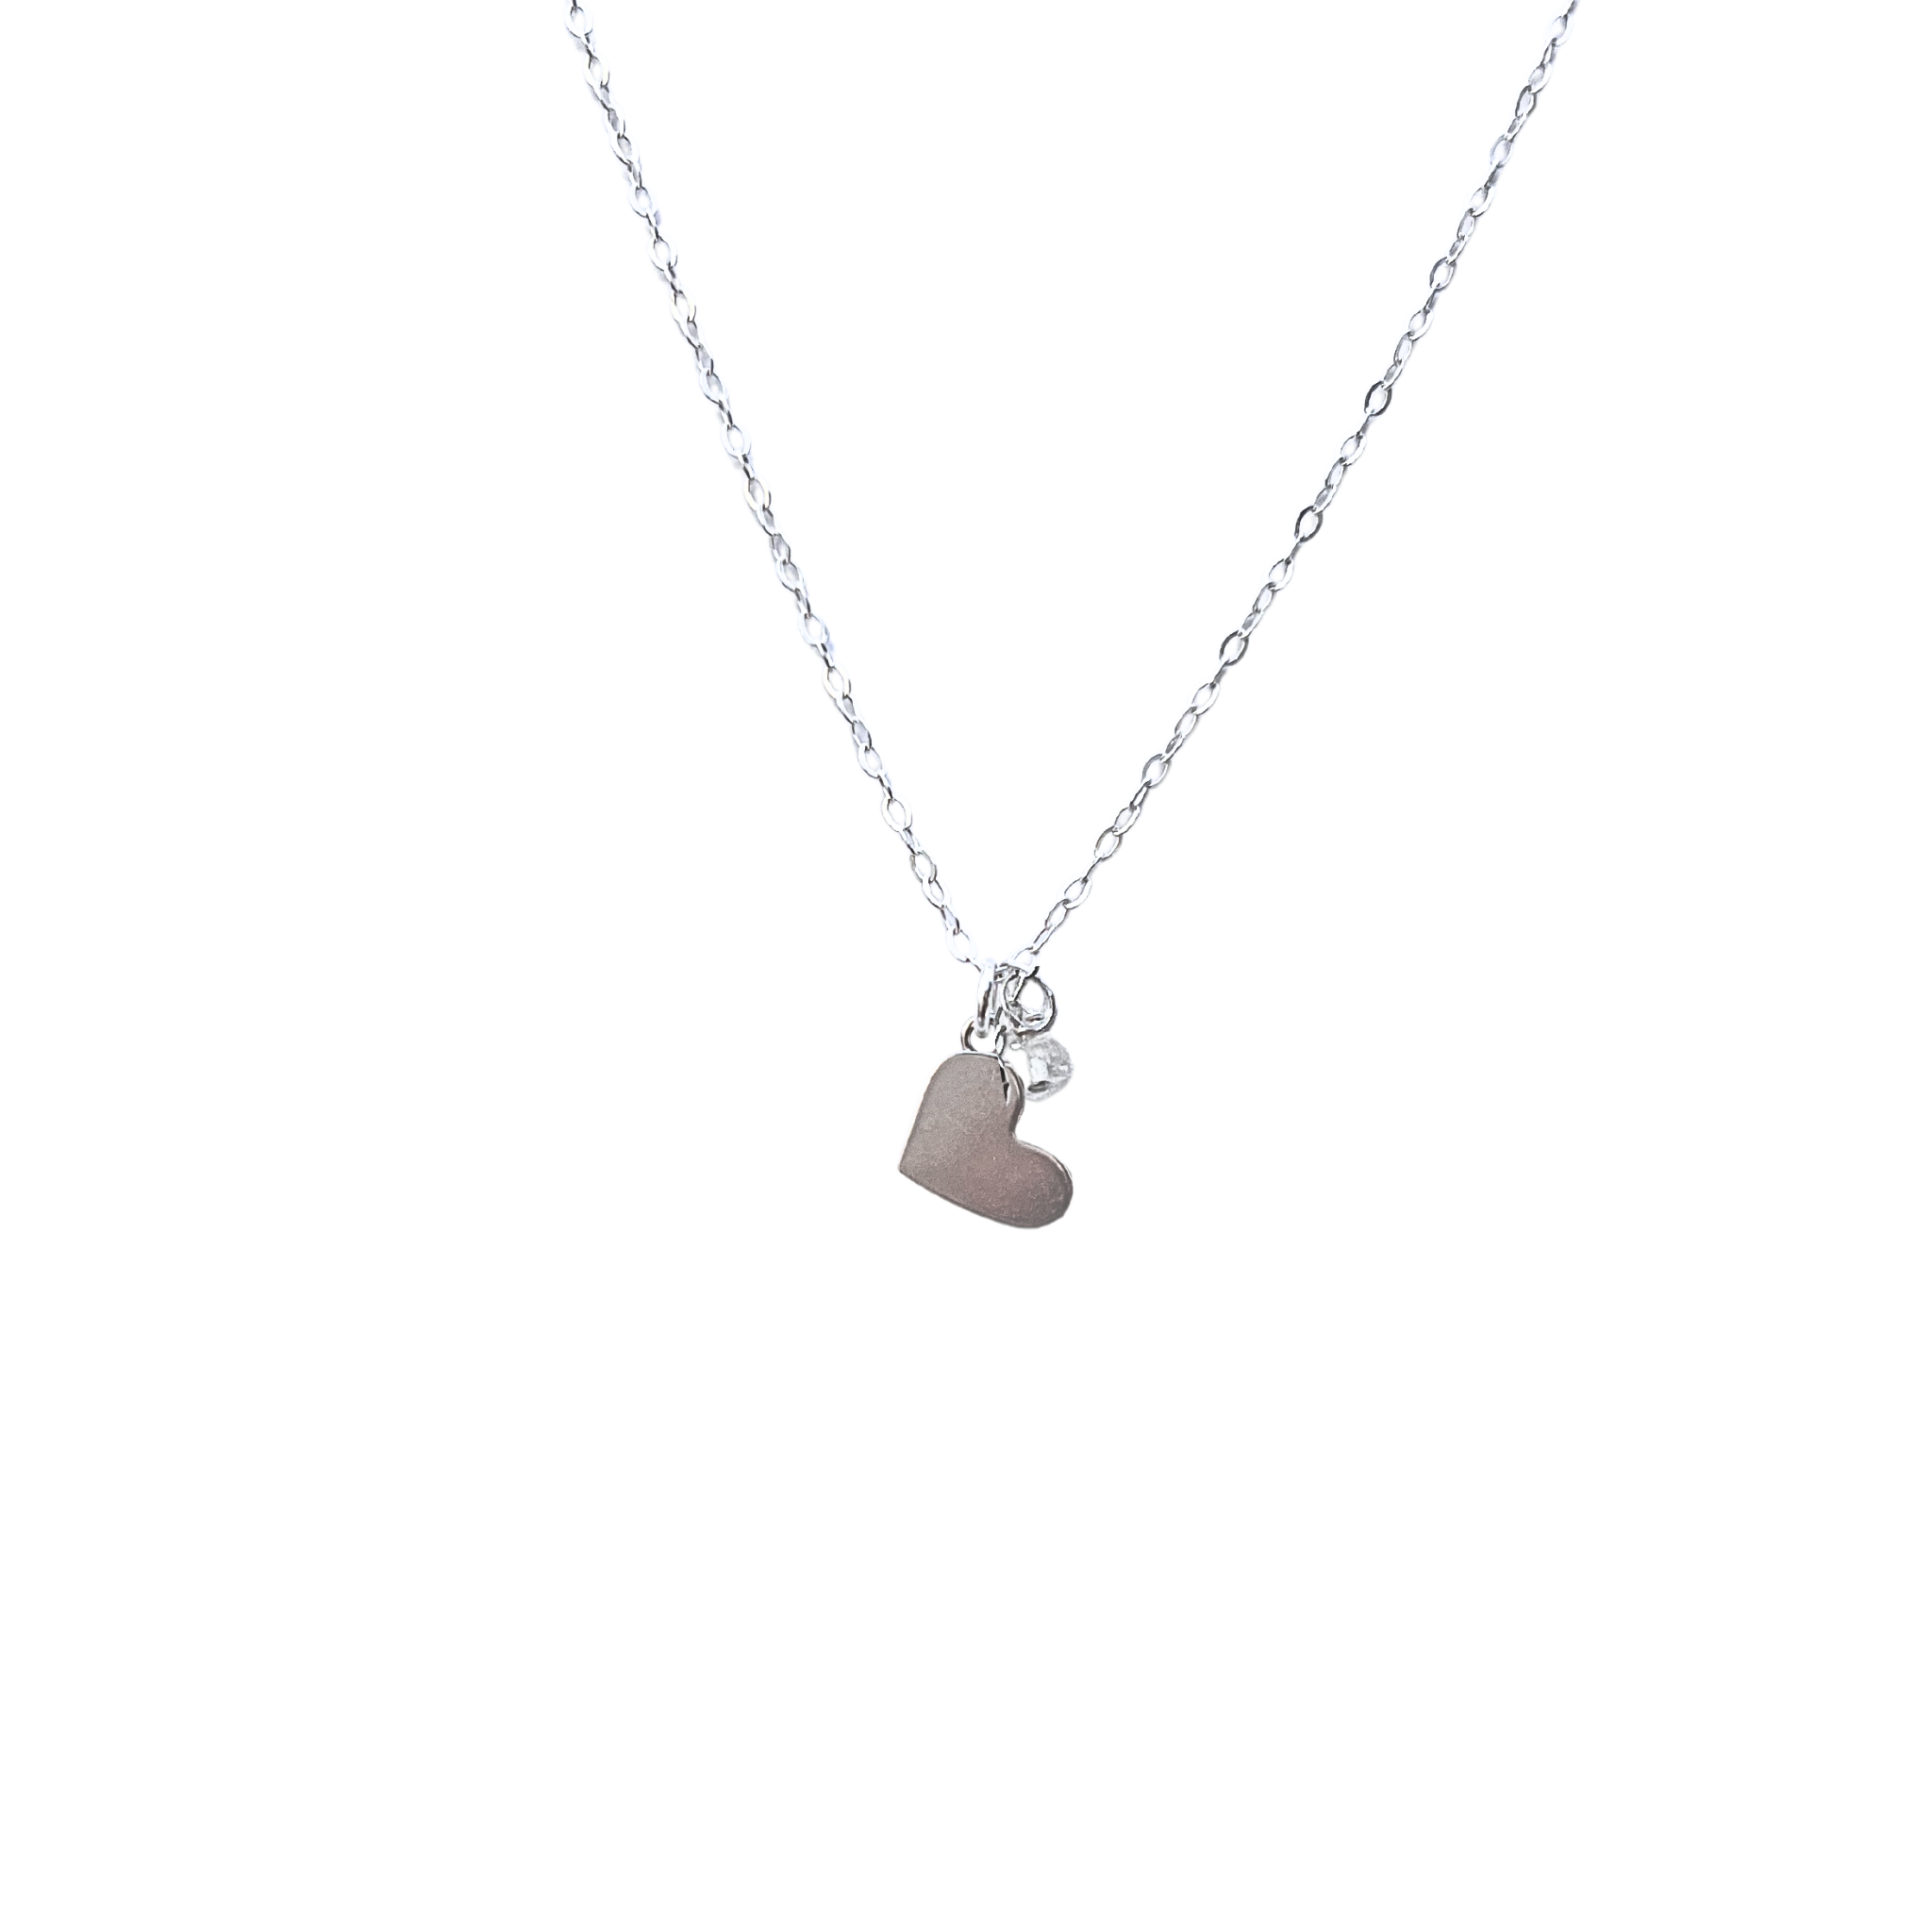 Silver Heart Unity Necklace